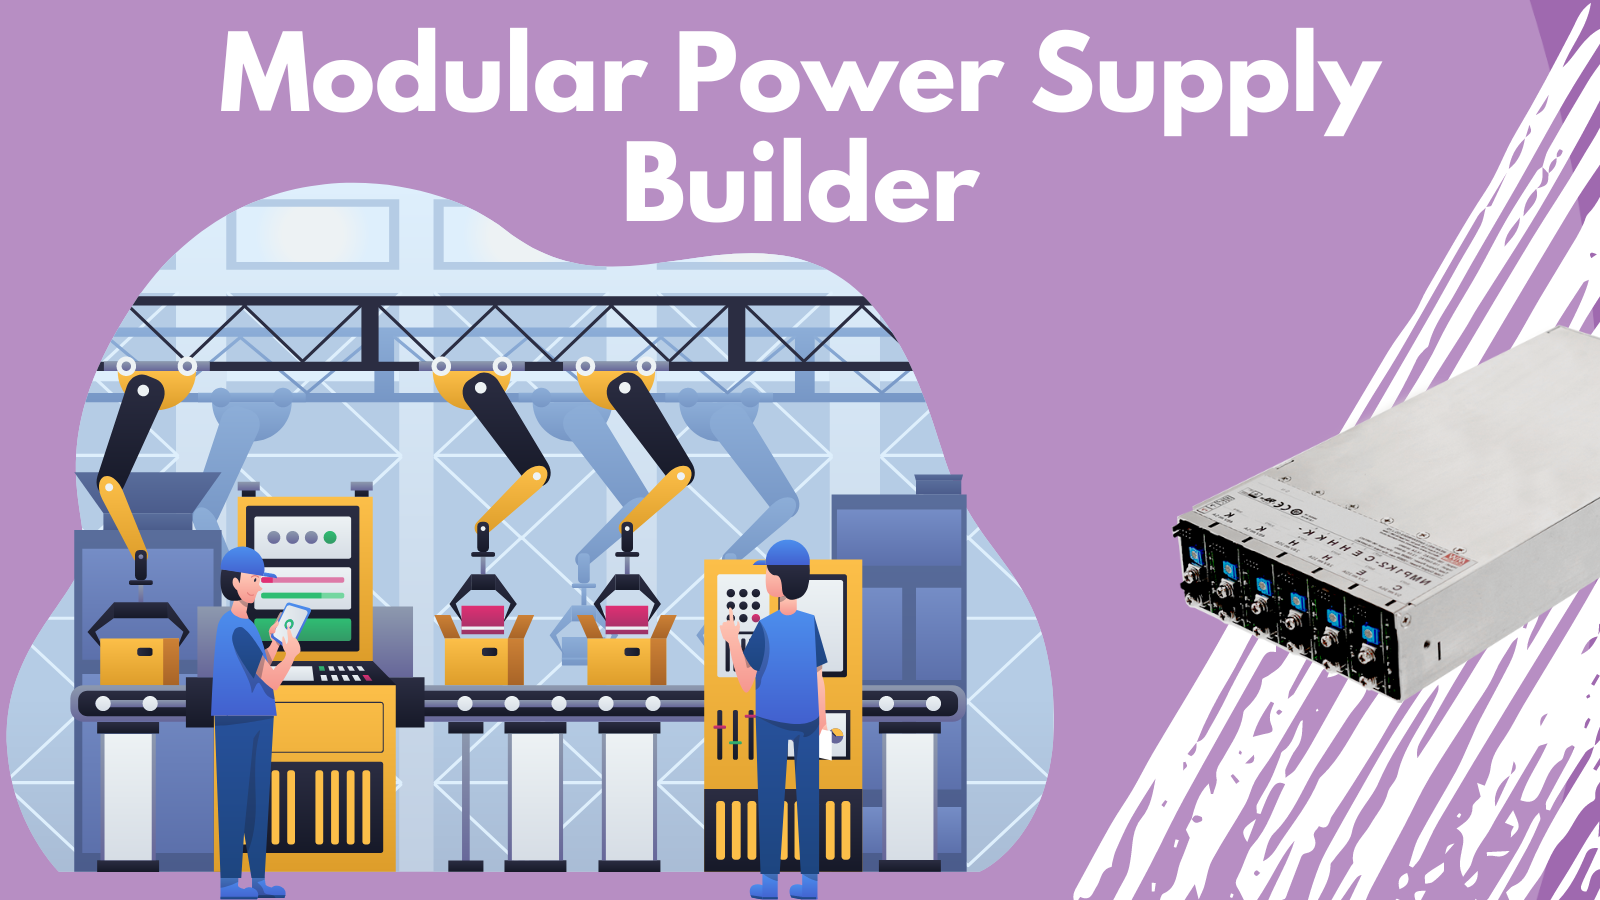 Tell us your output requirements and we can build a modular power supply for you